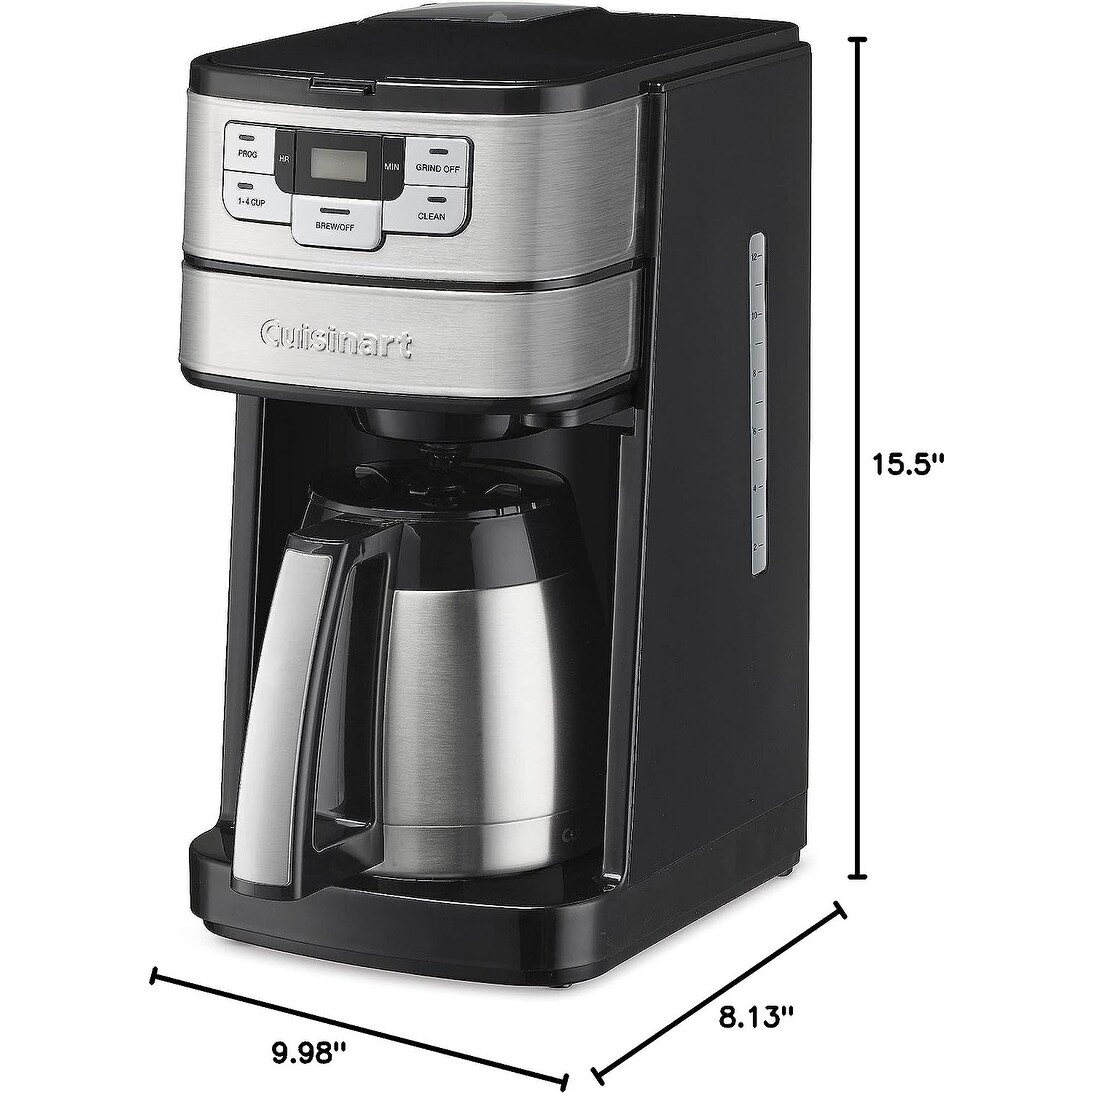 Cuisinart DGB-450 10 Cup Coffee Maker with Grinder, Automatic Grind & Brew, Black/Silver,